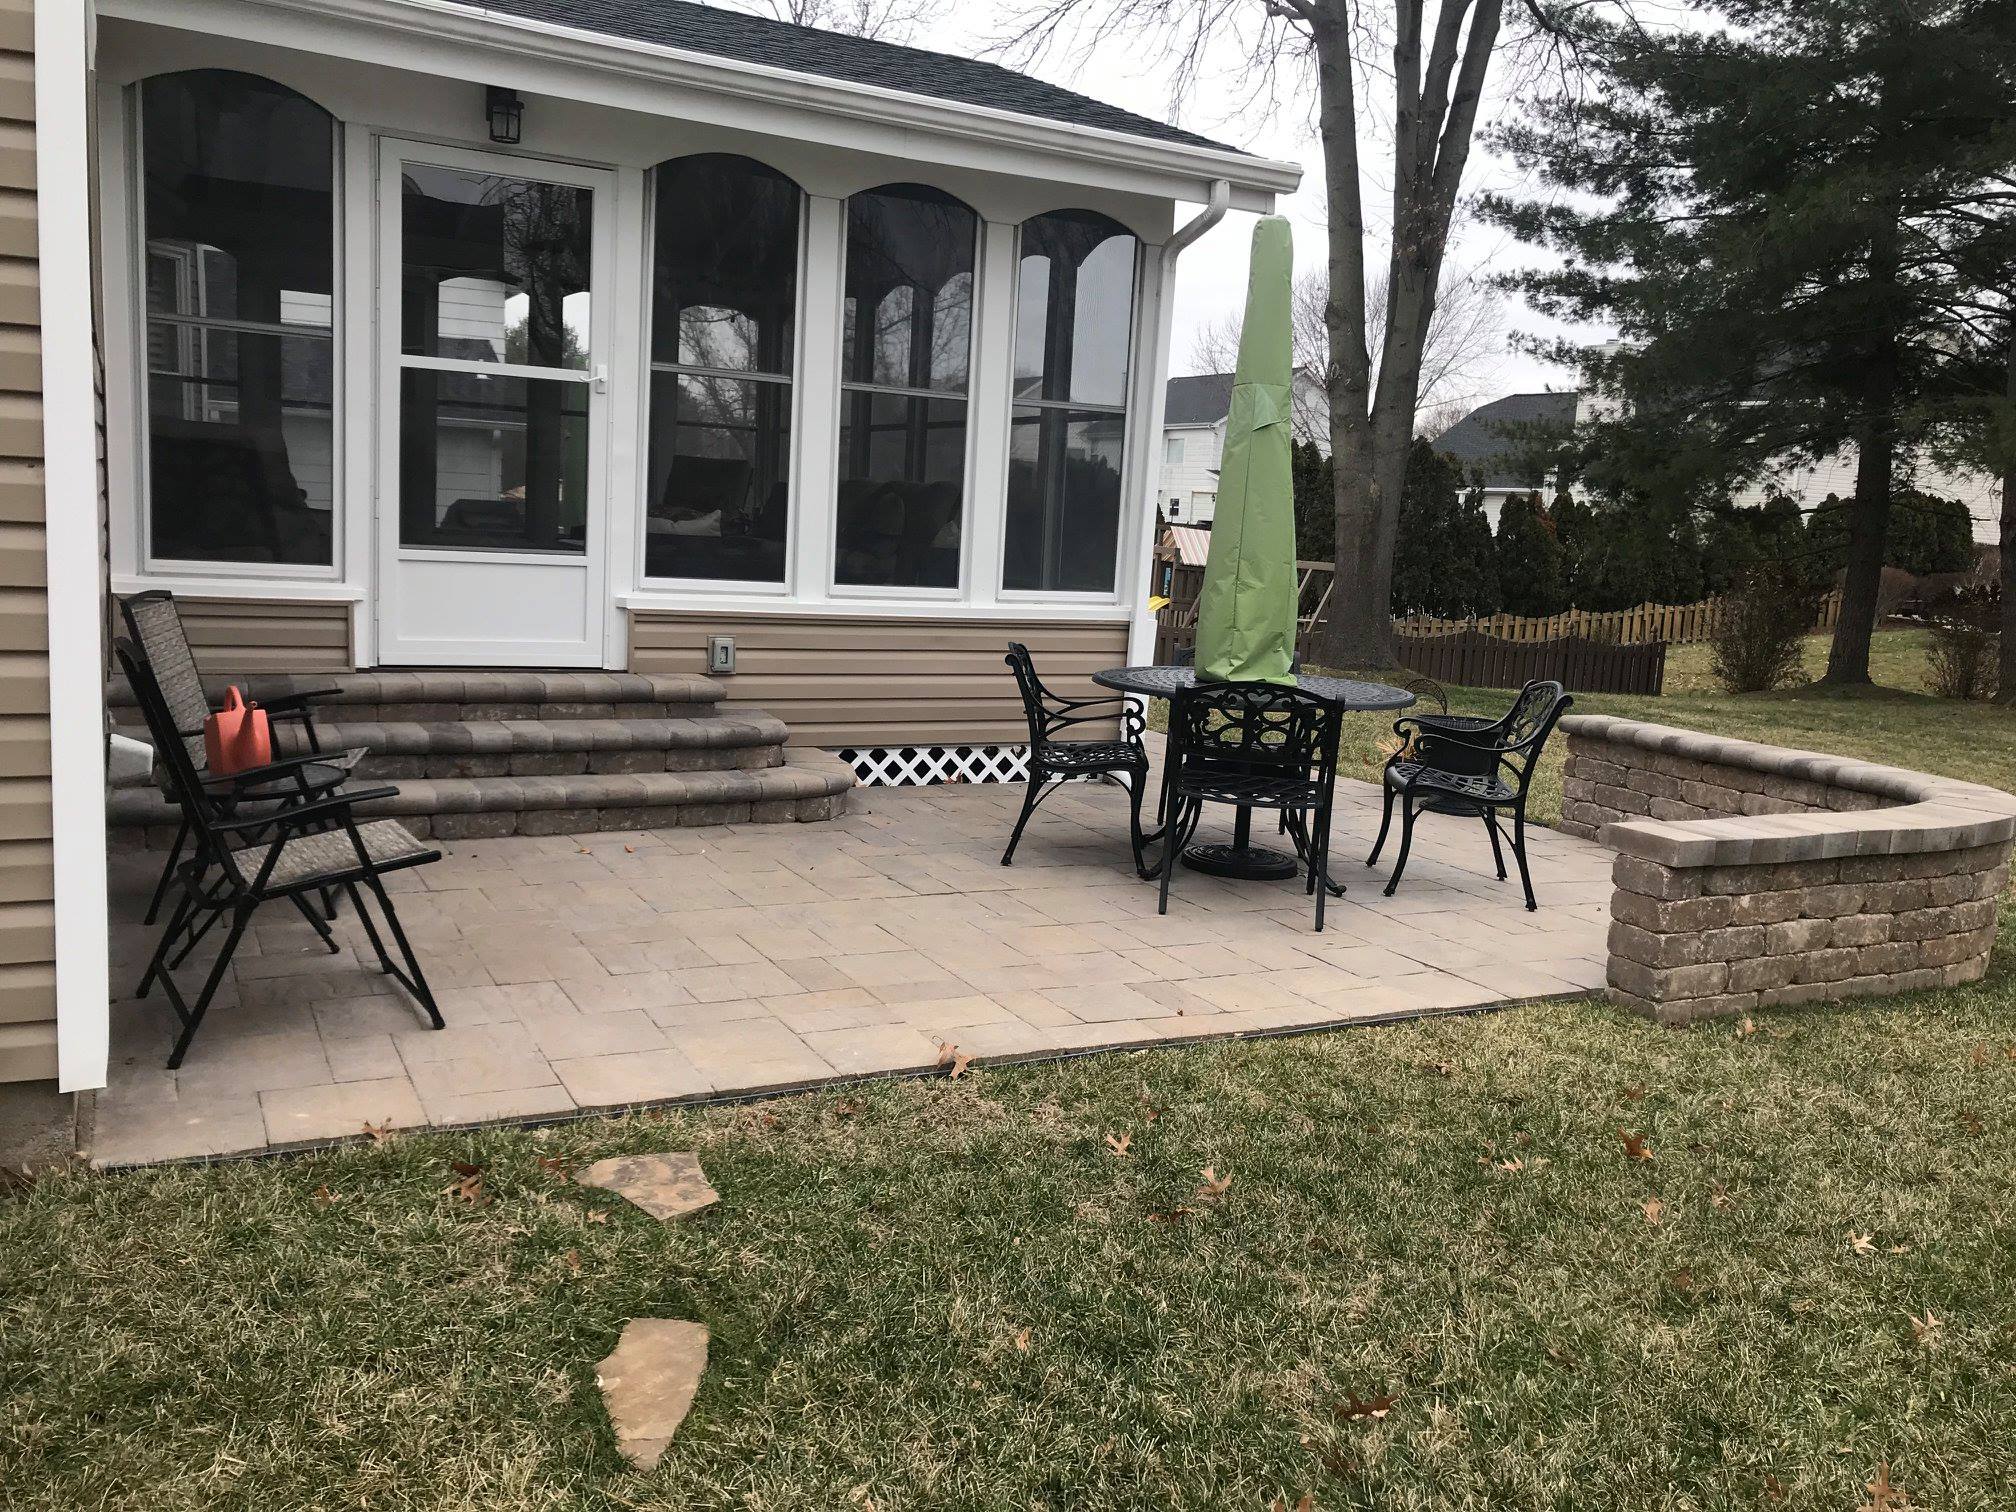 Big Bend Landscaping use your outdoor living space